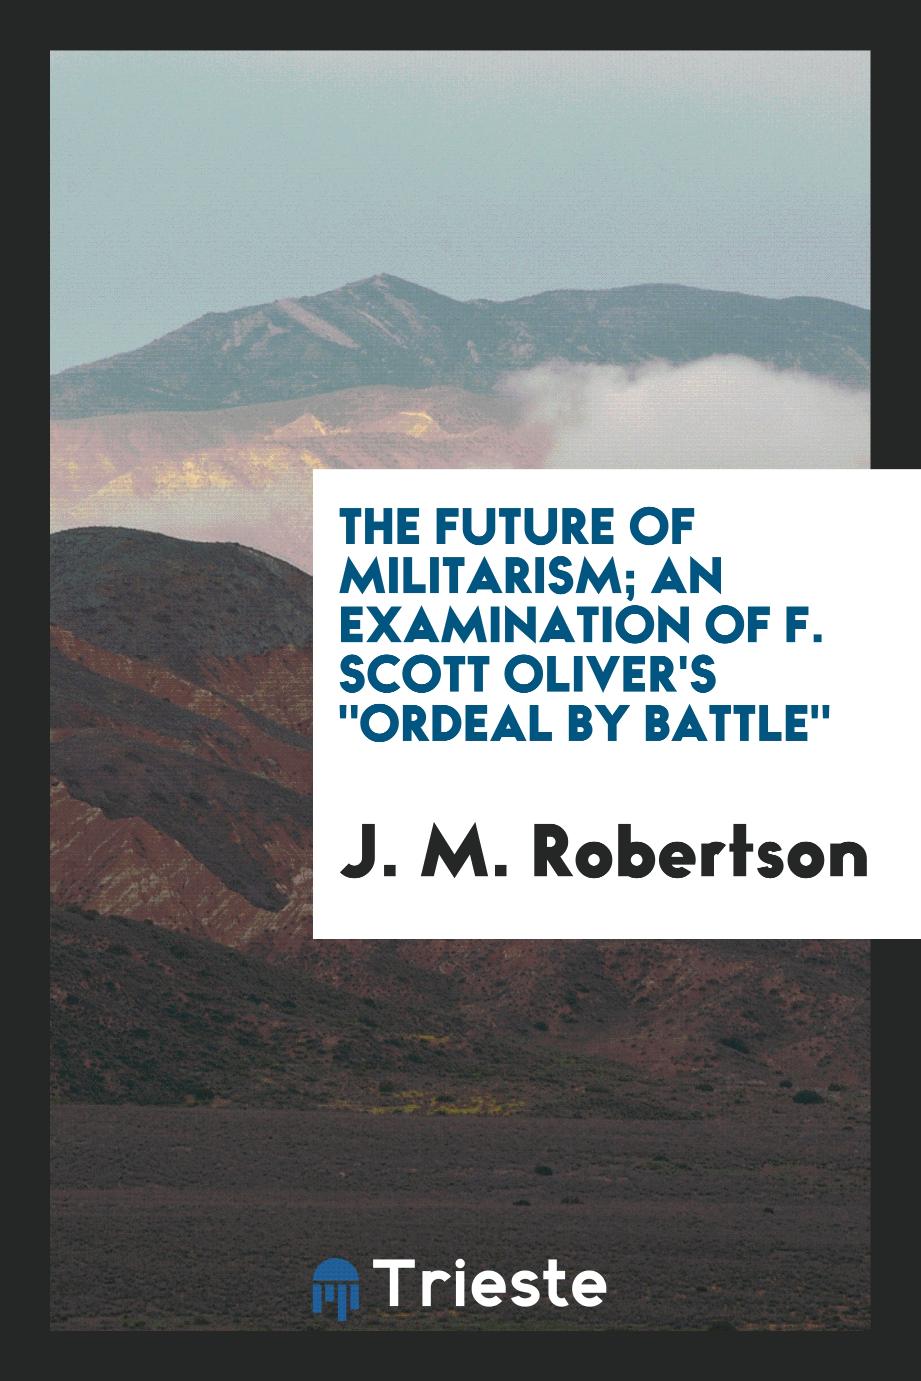 The Future of Militarism; An Examination of F. Scott Oliver's "Ordeal by Battle"